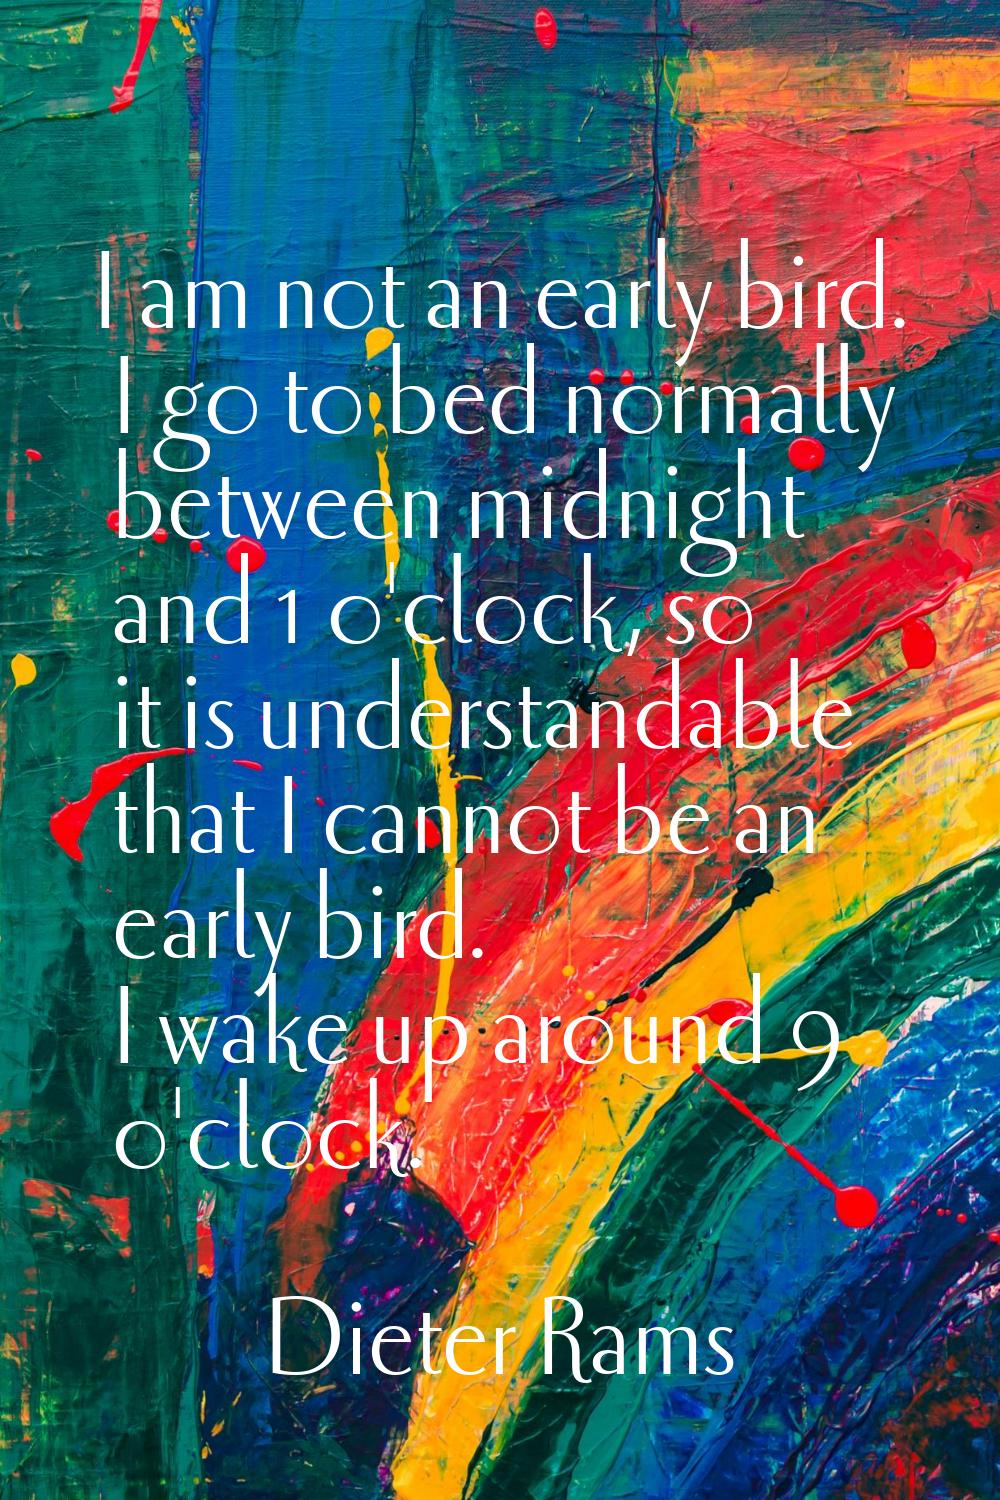 I am not an early bird. I go to bed normally between midnight and 1 o'clock, so it is understandabl